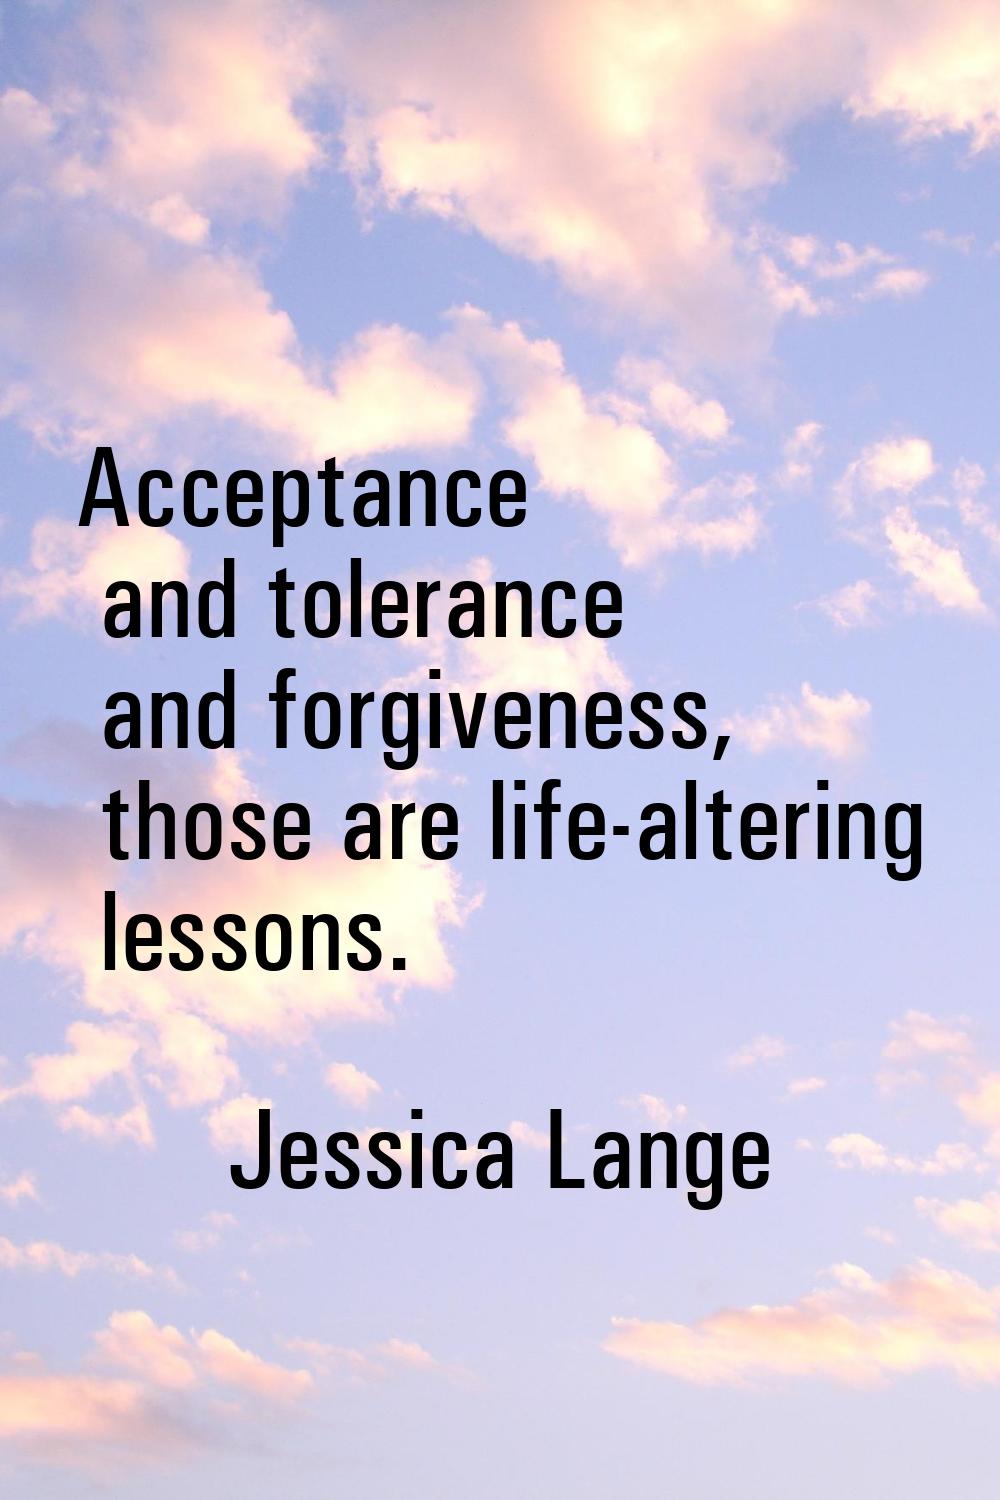 Acceptance and tolerance and forgiveness, those are life-altering lessons.